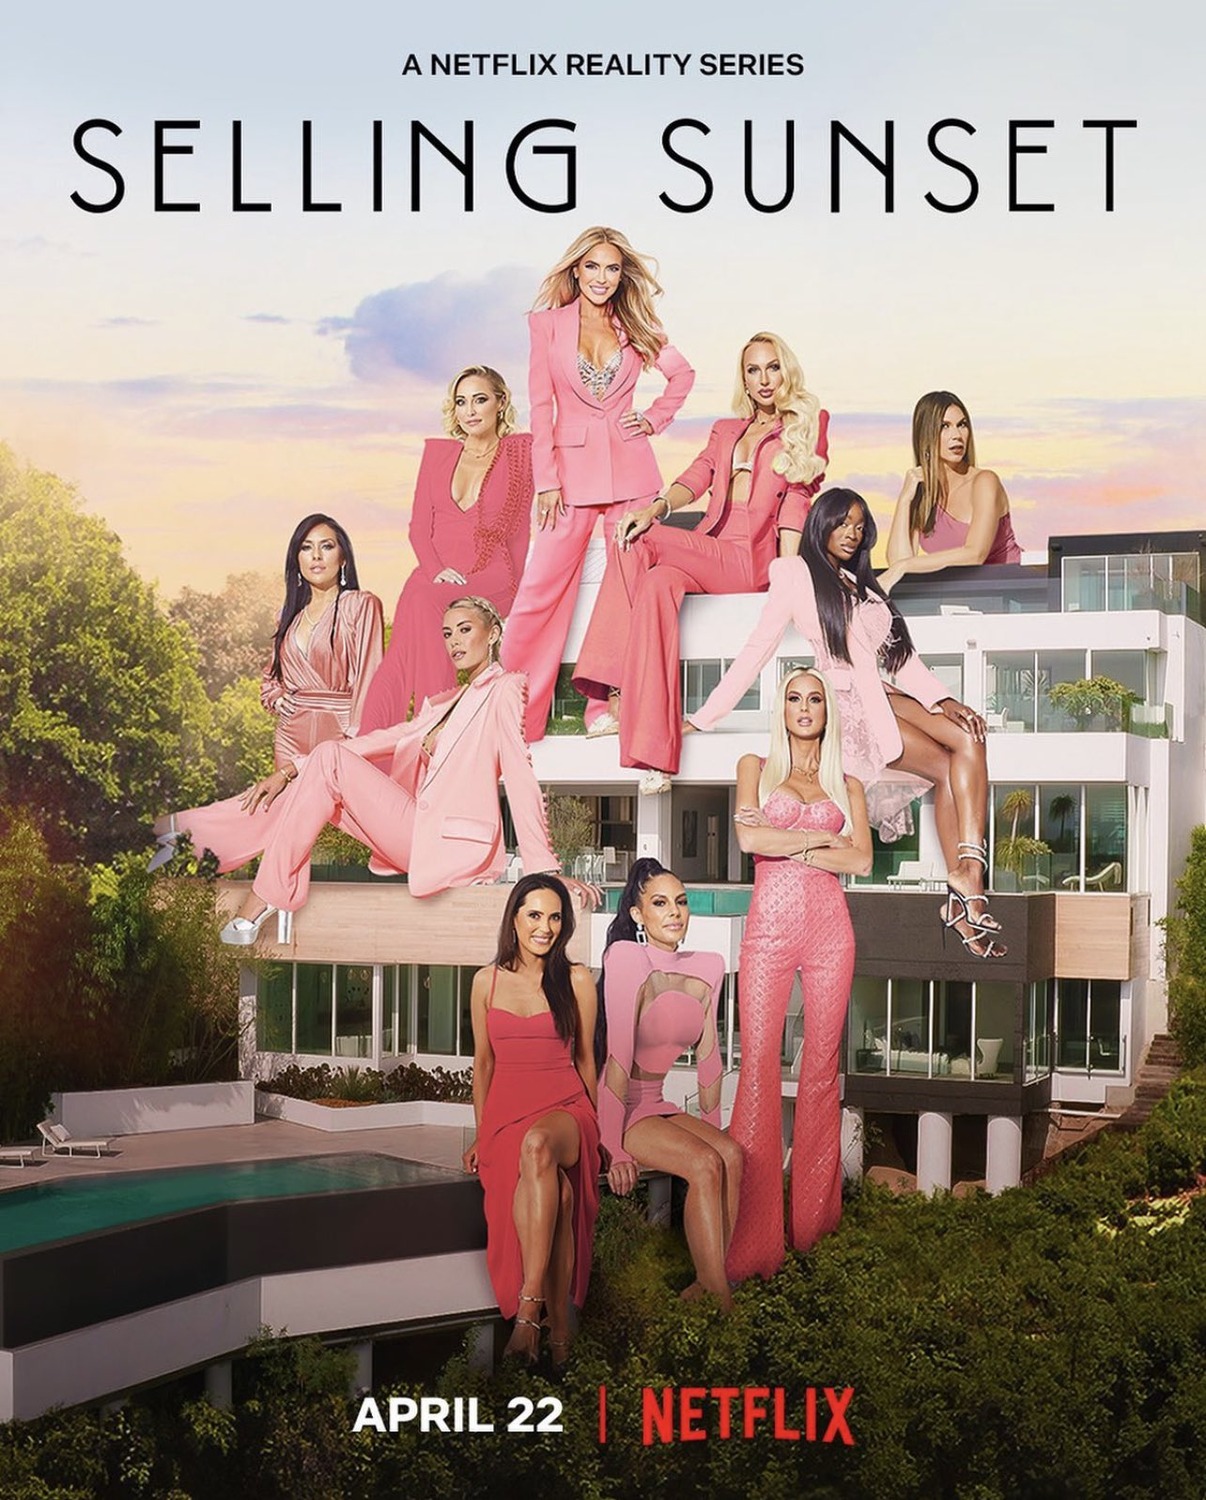 Extra Large TV Poster Image for Selling Sunset (#4 of 5)